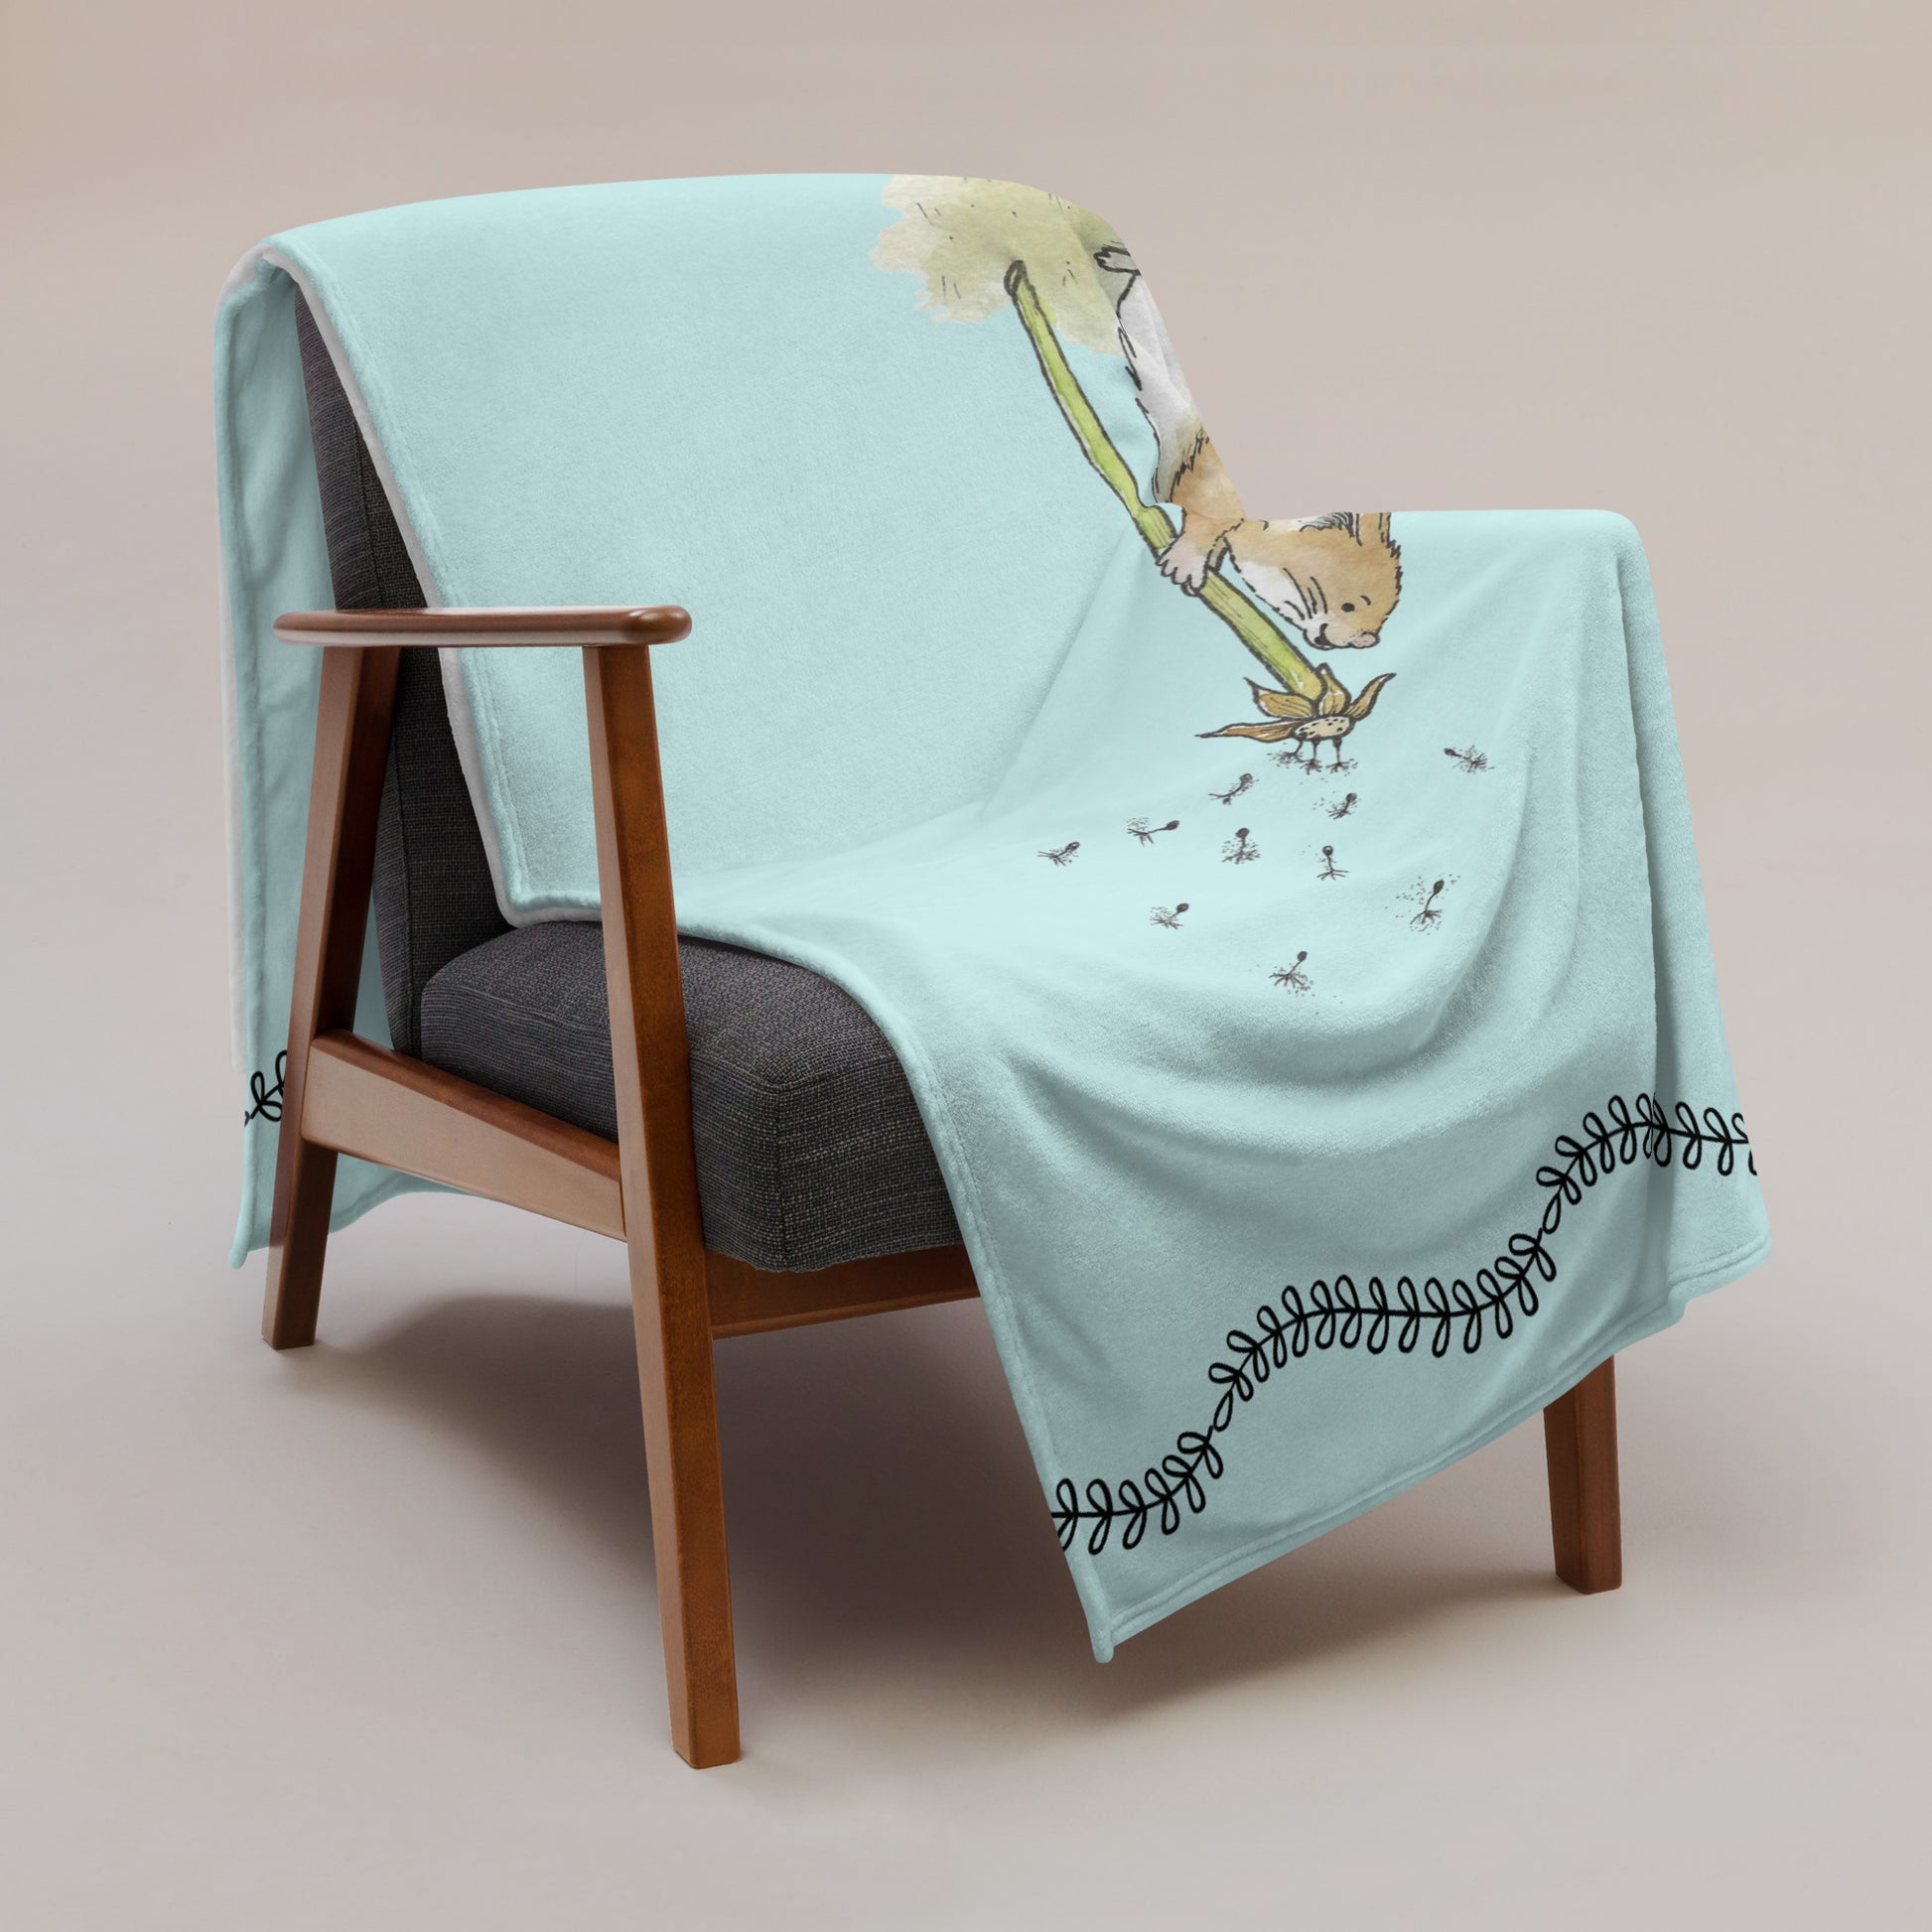 Original Dandelion Wish design of cute watercolor mouse blowing dandelion seeds on a light blue background. Black vine border on top and bottom. Make a Wish phrase below mouse graphic. 50 by 60 inch throw blanket. draped over chair.